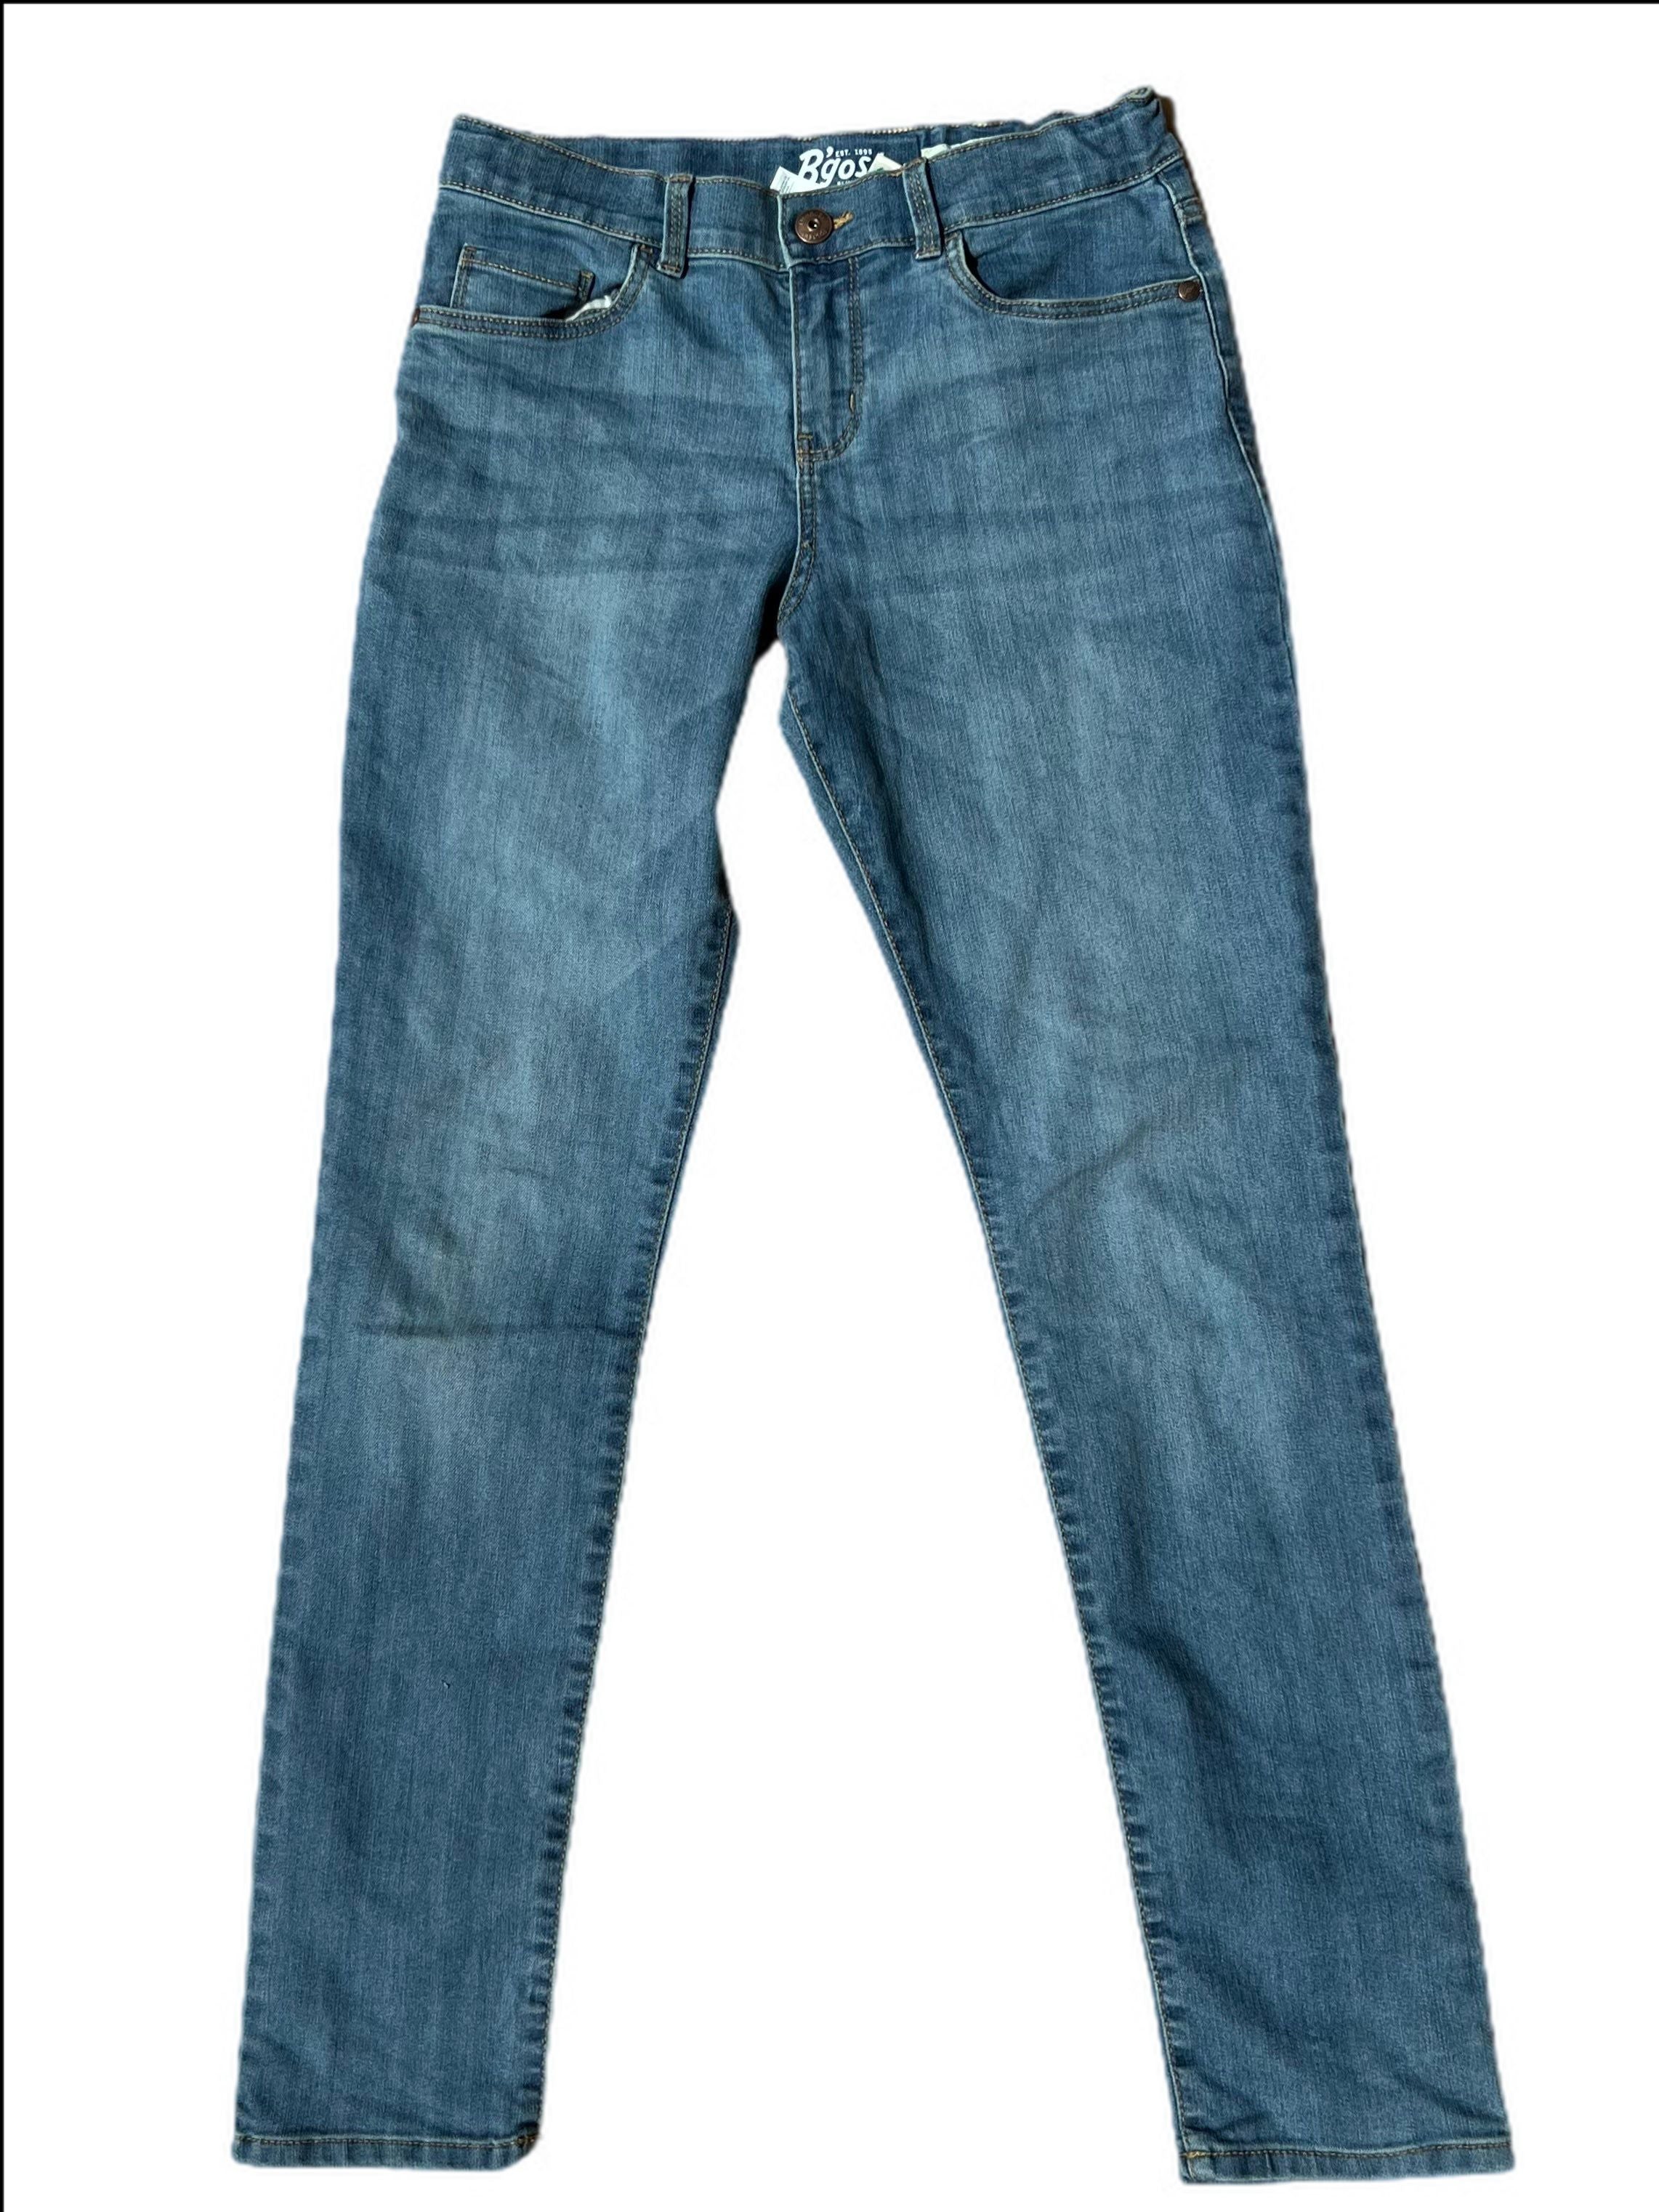 Jeans with Adjustable Waist